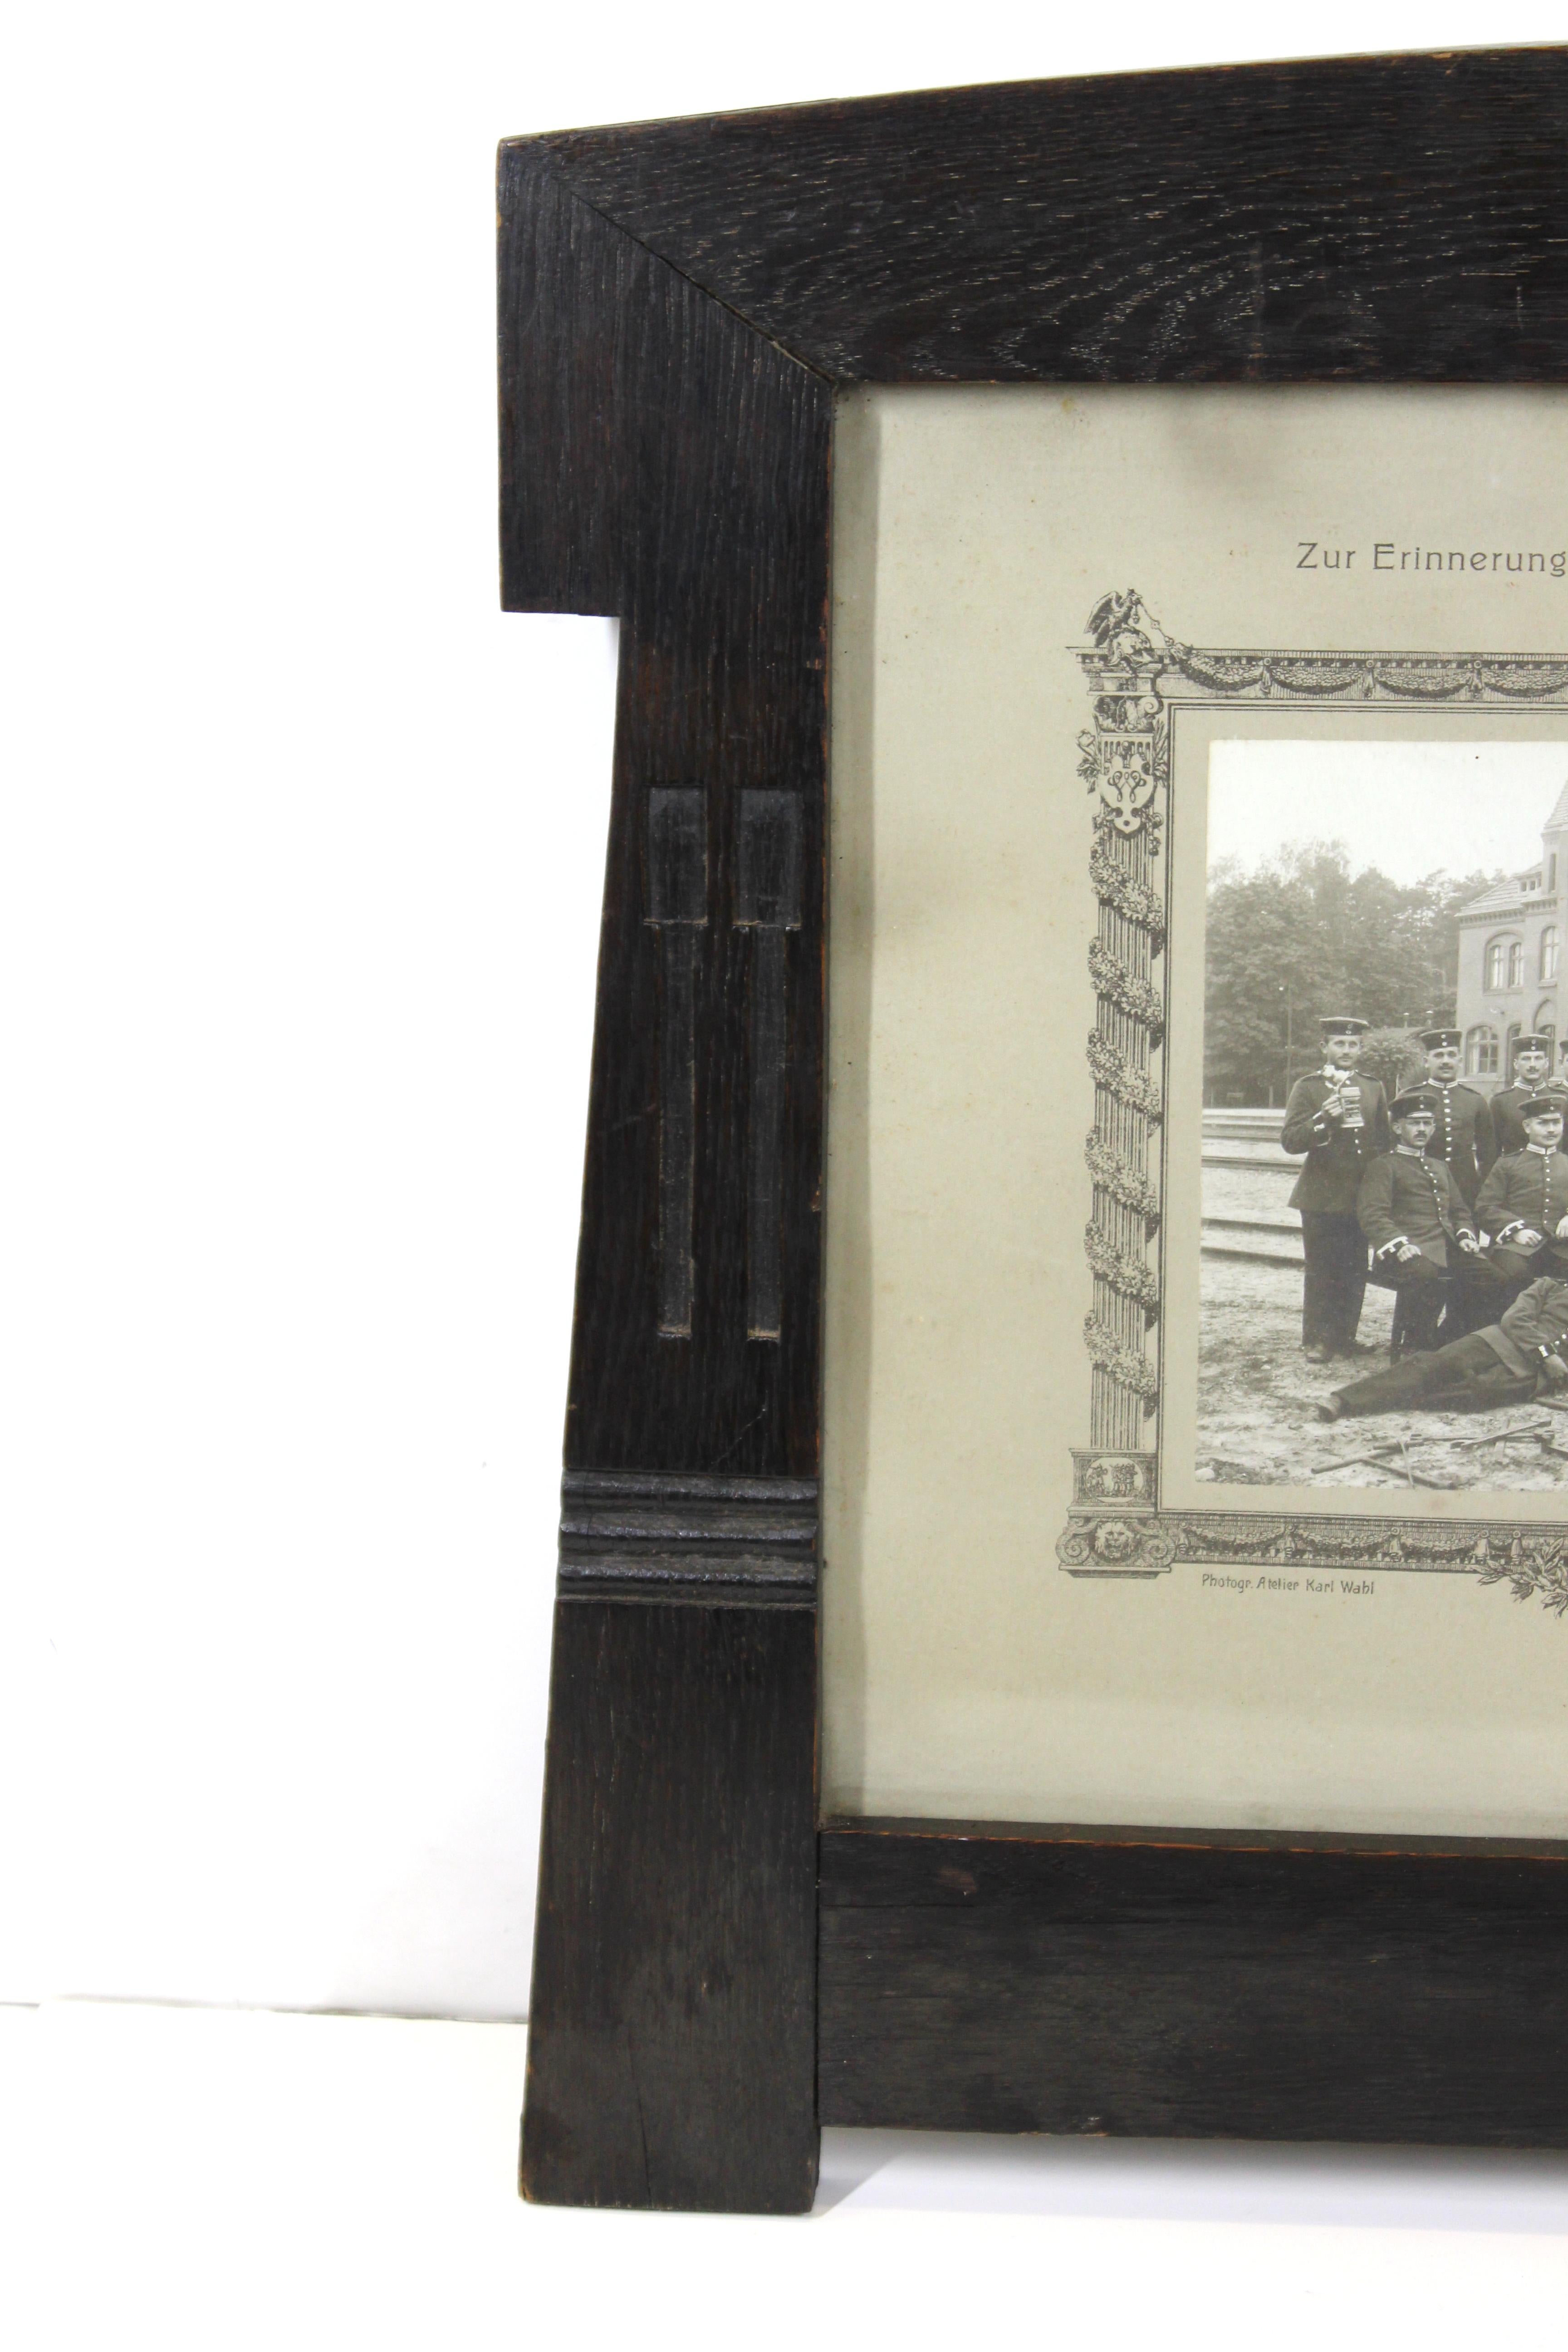 German secessionist carved and ebonized oak picture frame made by a follower of Behrens. The piece was likely made during the 1910s and has an antique photograph of posing German railway workers from circa 1912. In great antique condition with